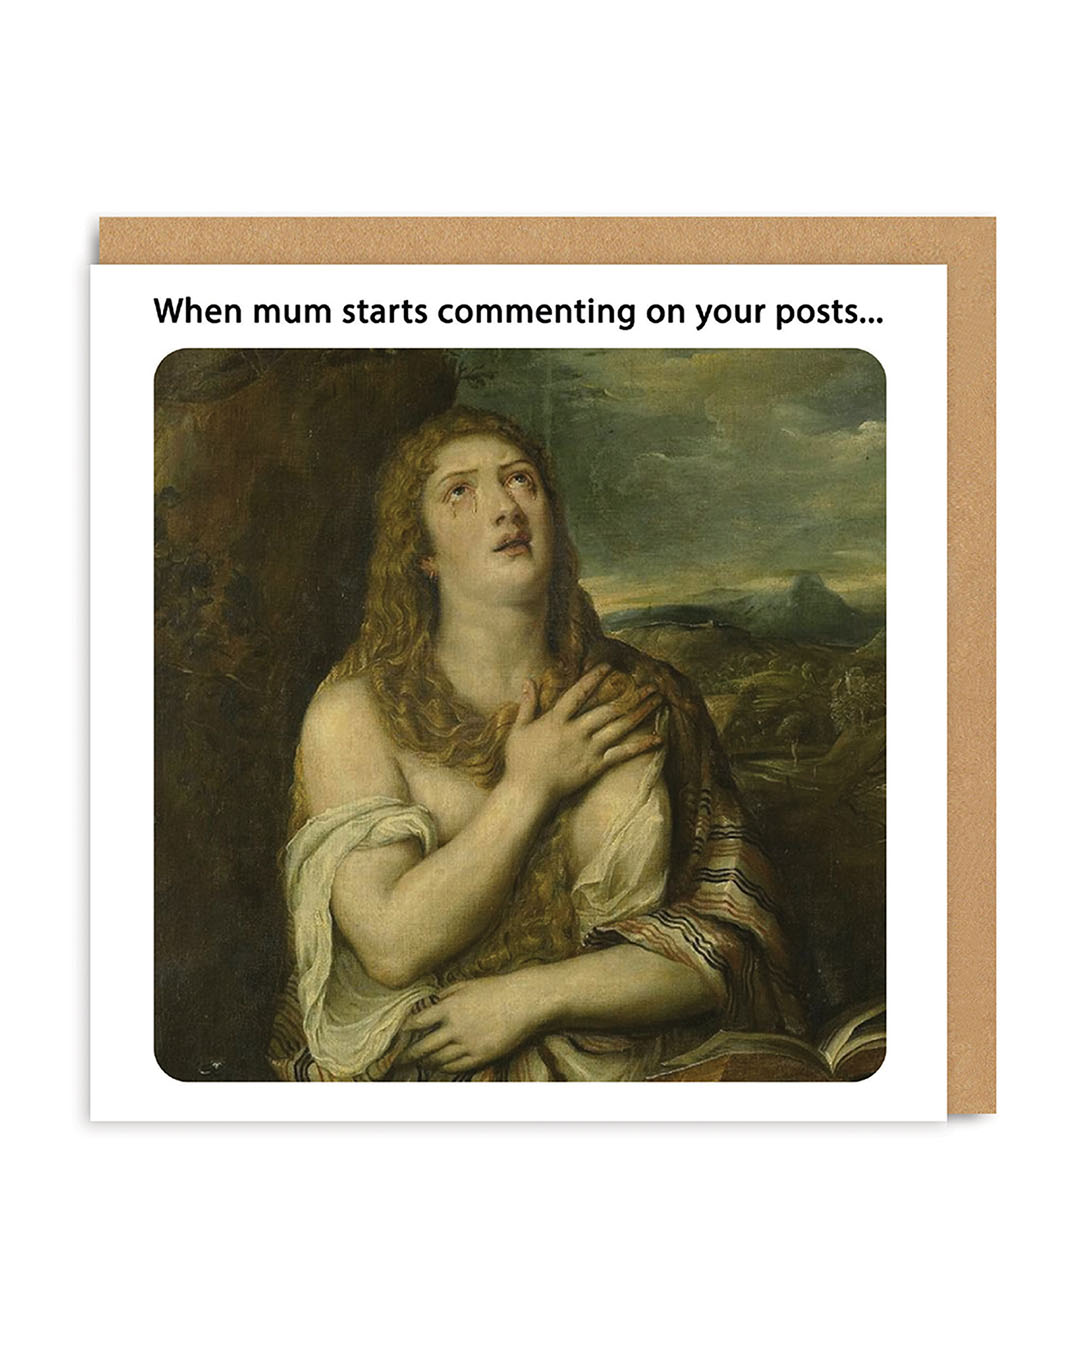 Mum Commenting on your Posts Greeting Card